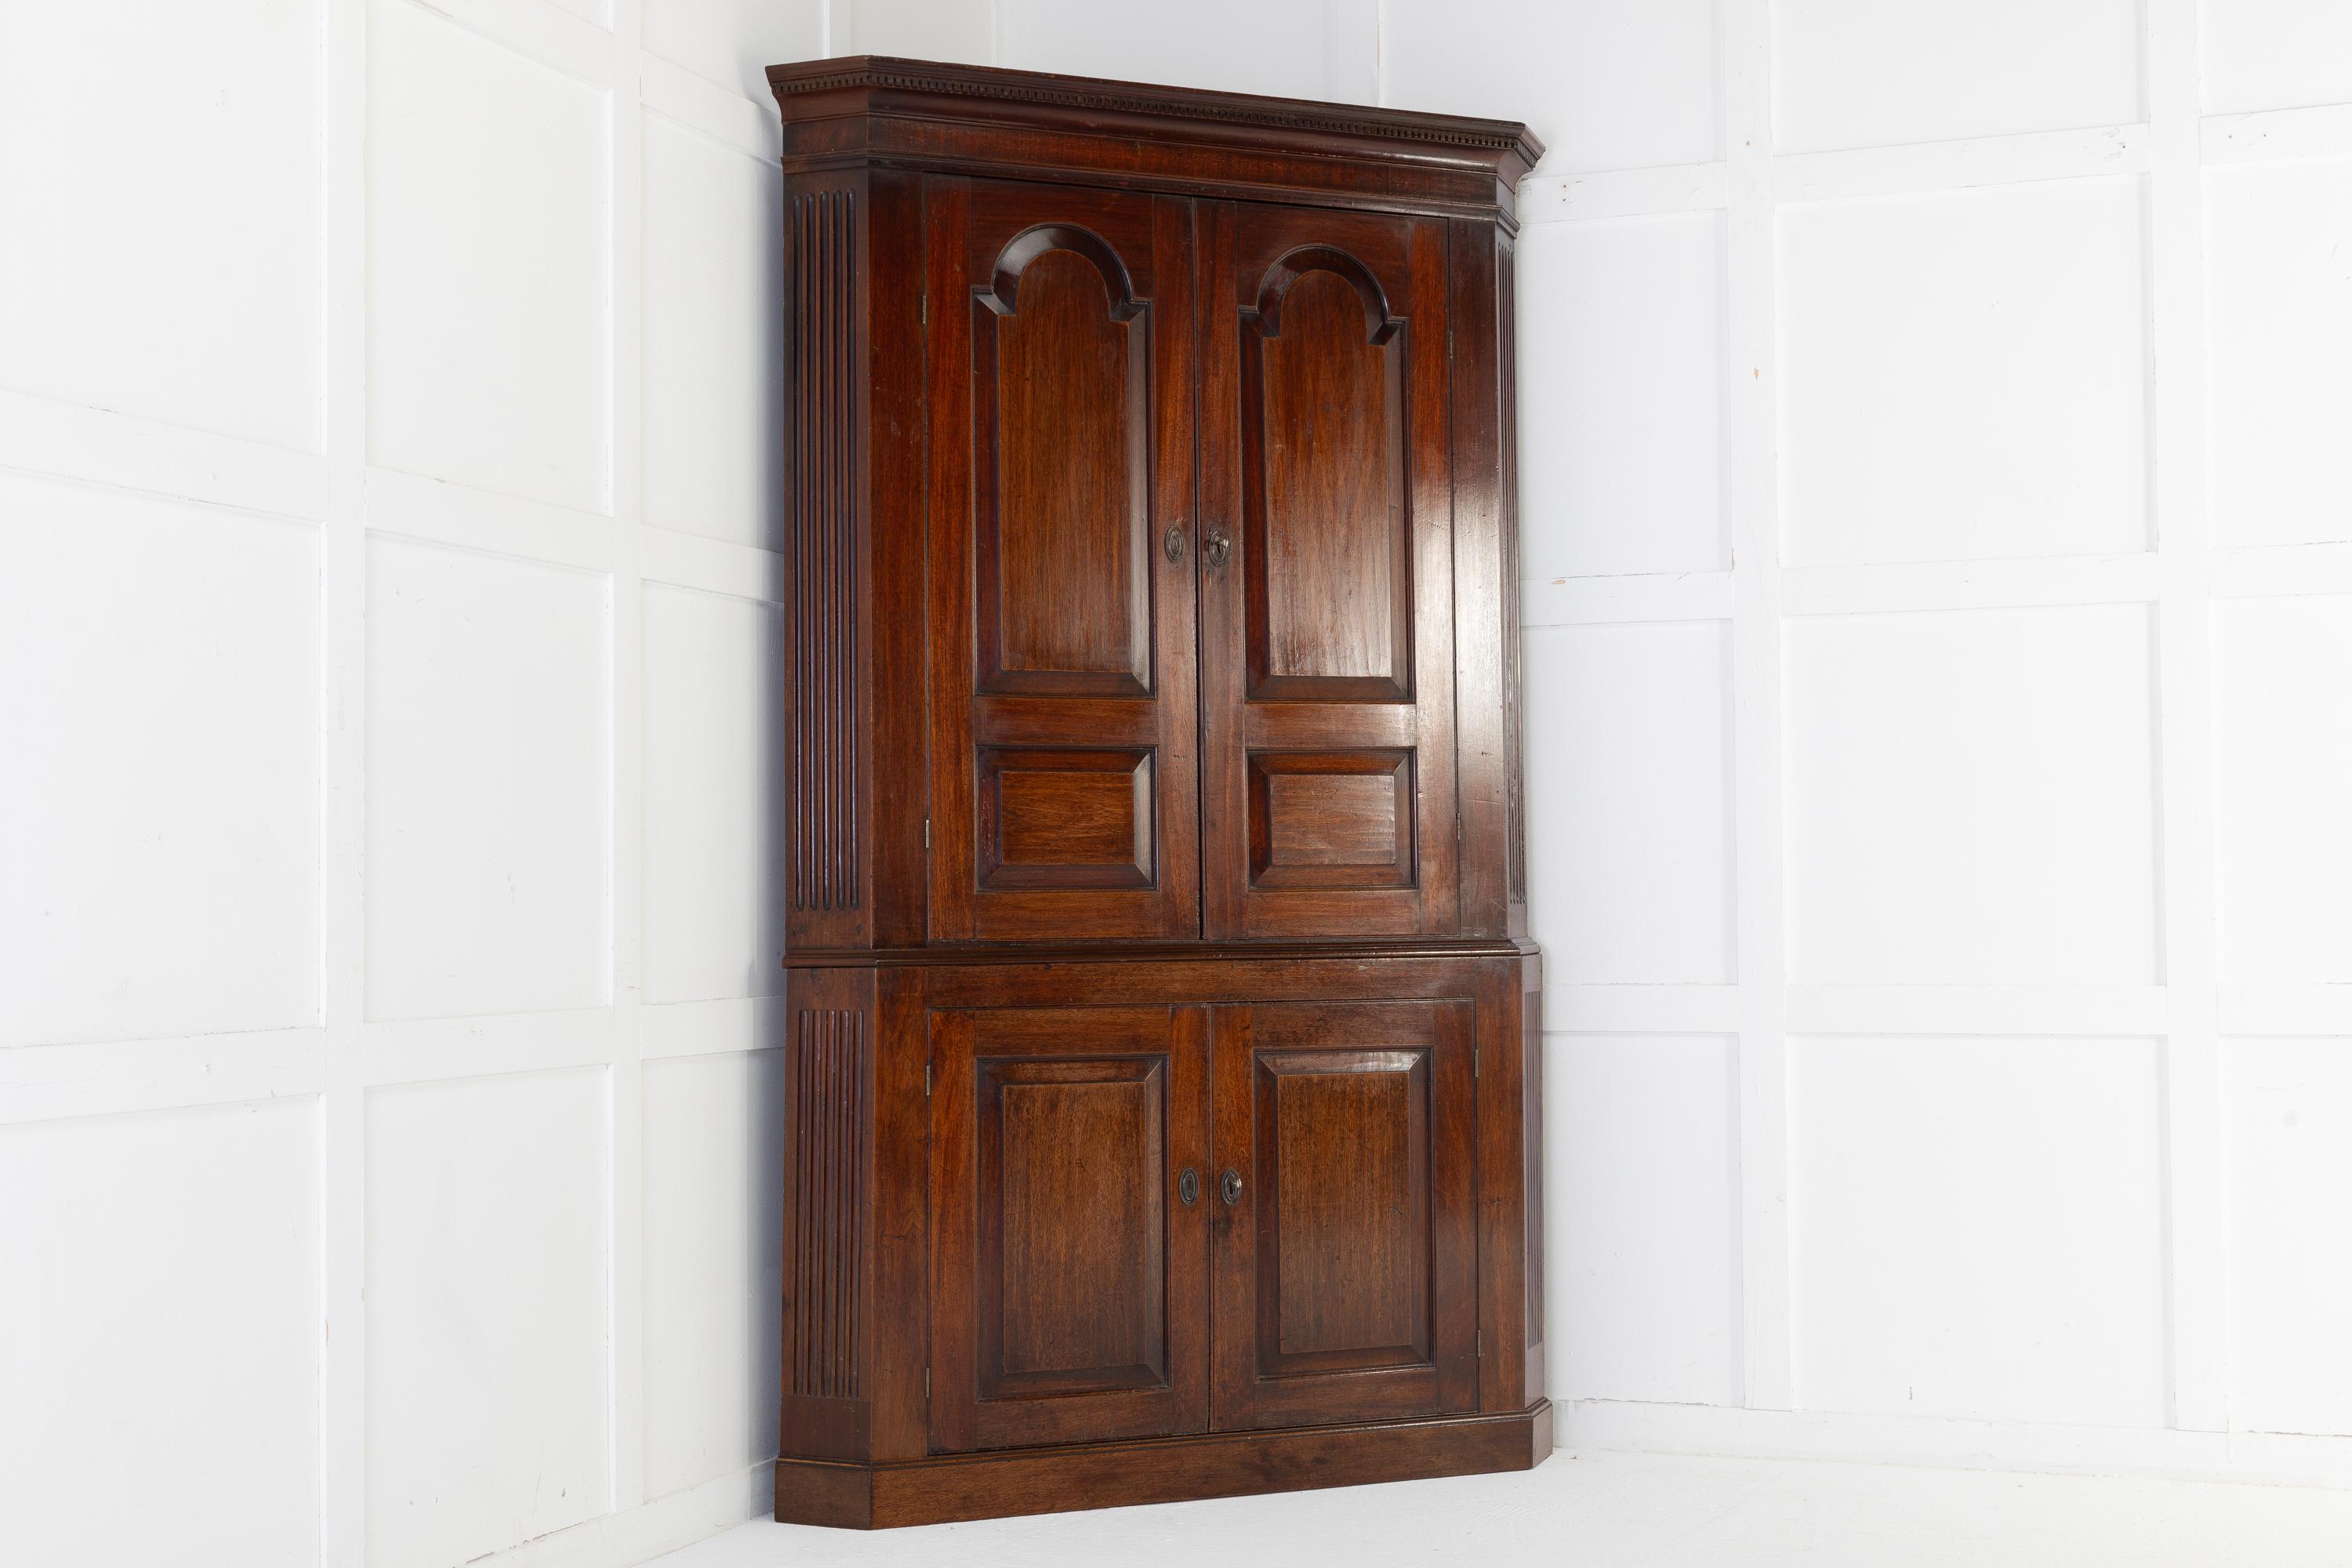 Elegant, English 18th century mahogany, floor standing corner cupboard in two sections. The tall top has a dentil moulded cornice above fielded, arched panelled doors which open to reveal three shaped shelves. The shorter base has two panelled doors